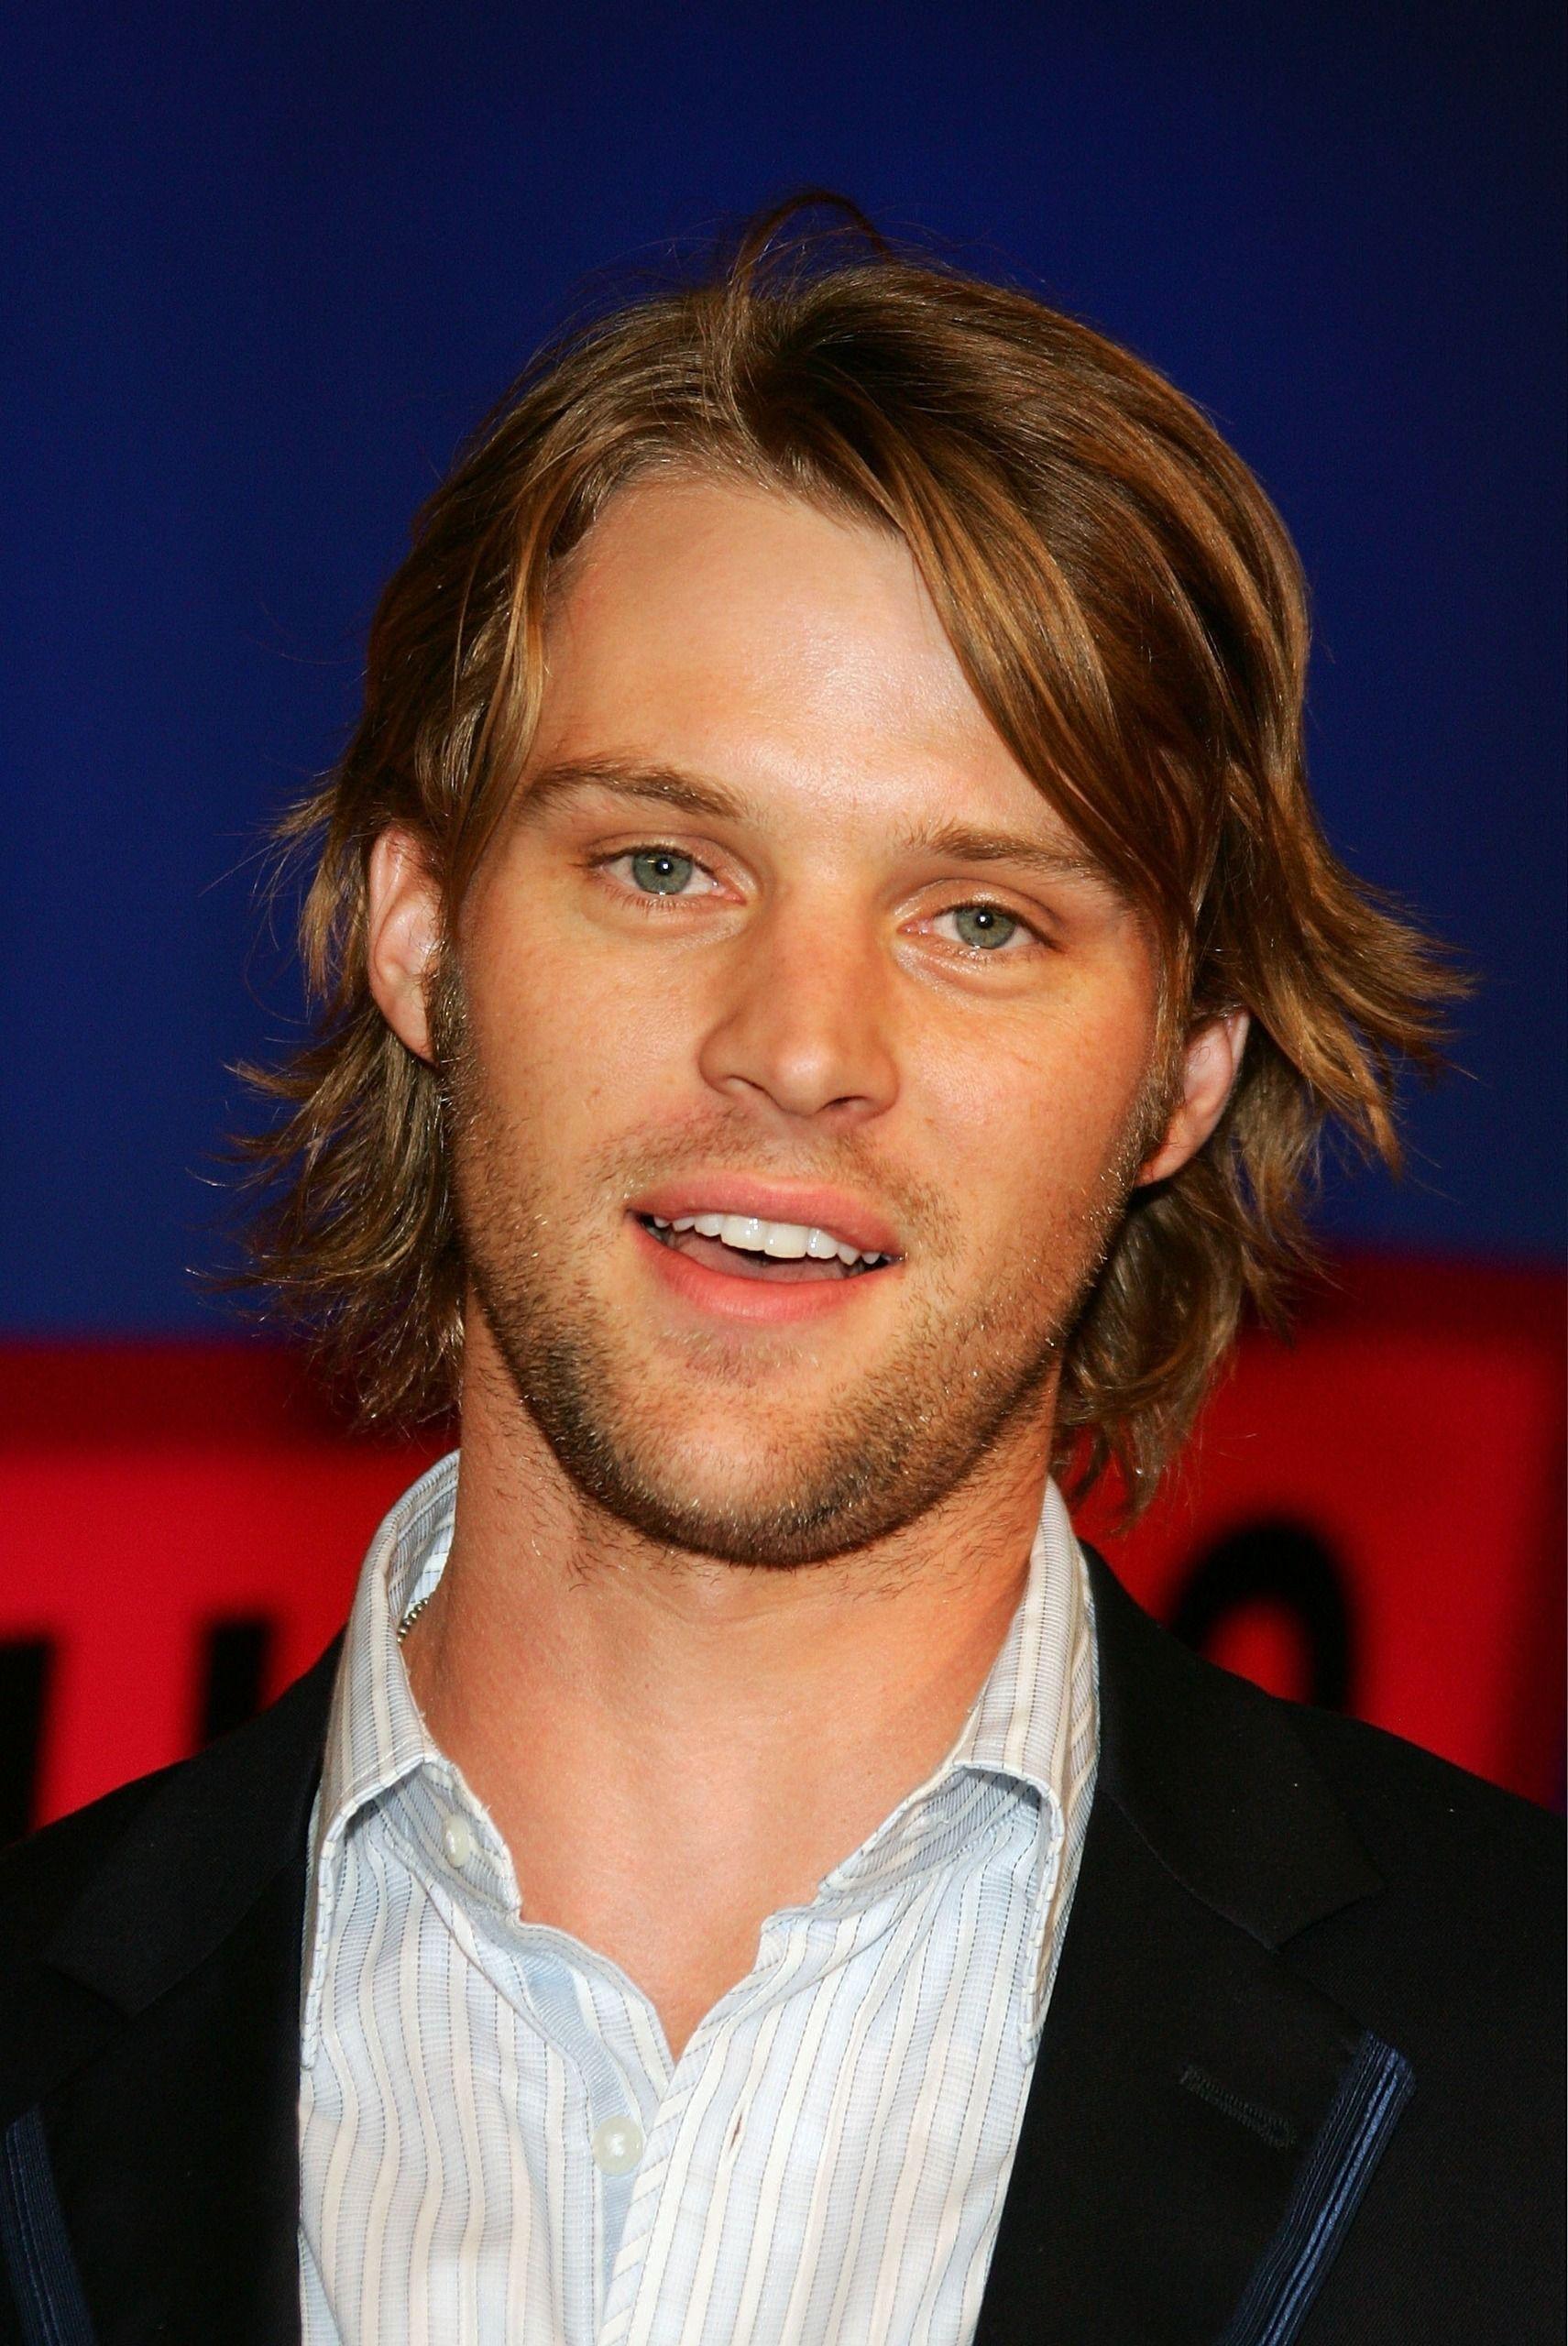 Jesse Jesse Spencer 1873543 1711 2560 HD Wallpapers and Pictures.